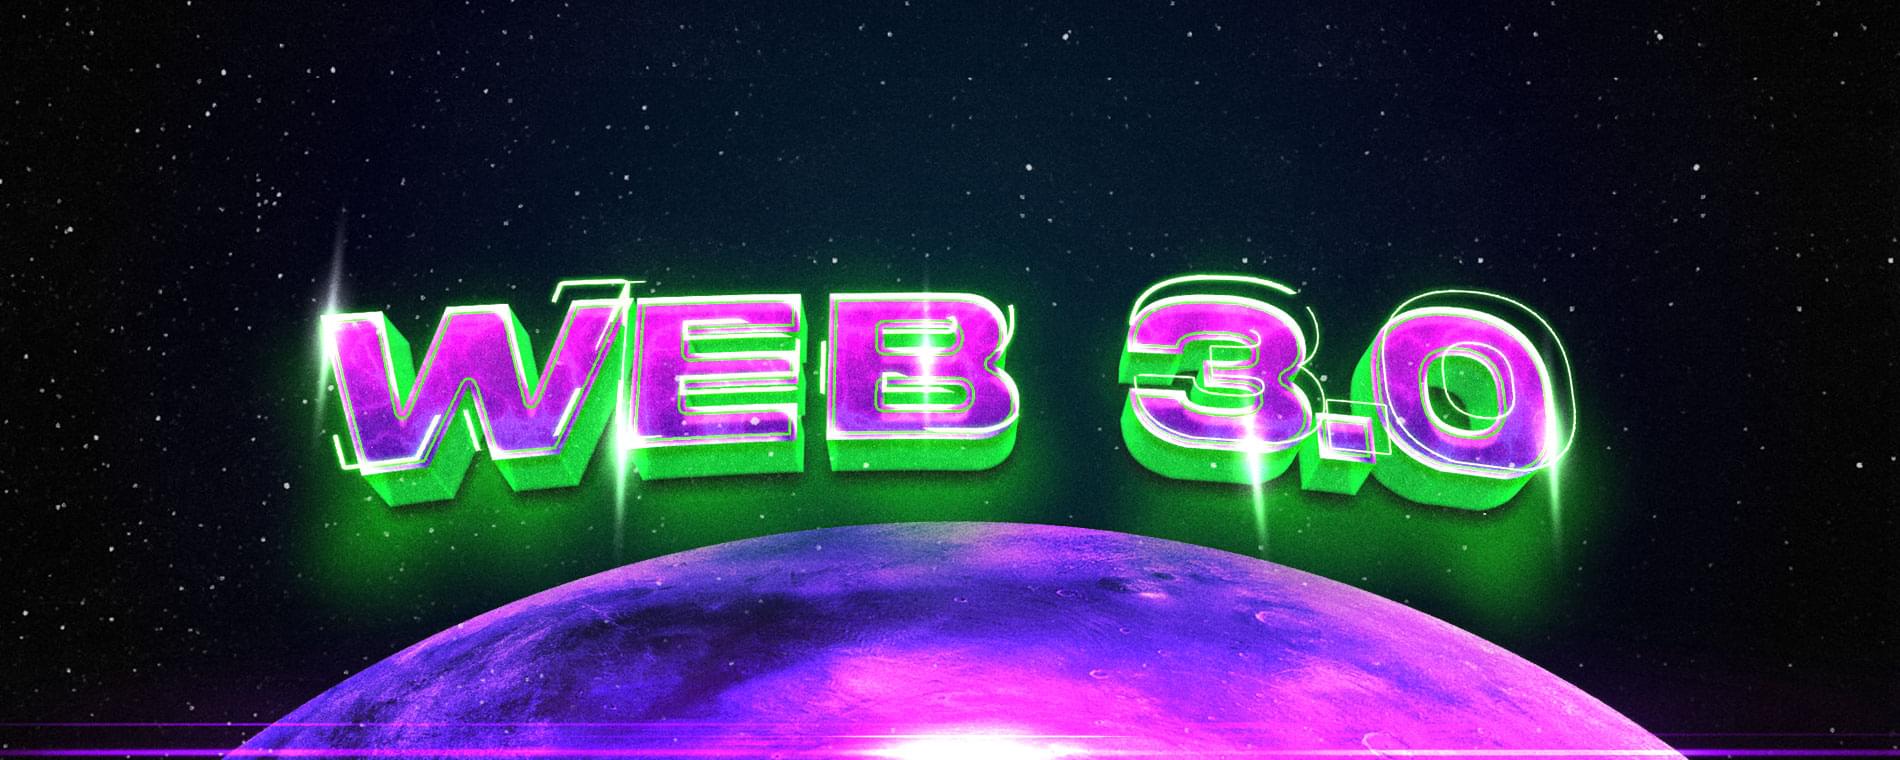 The world’s largest companies are getting on board with Web 3.0